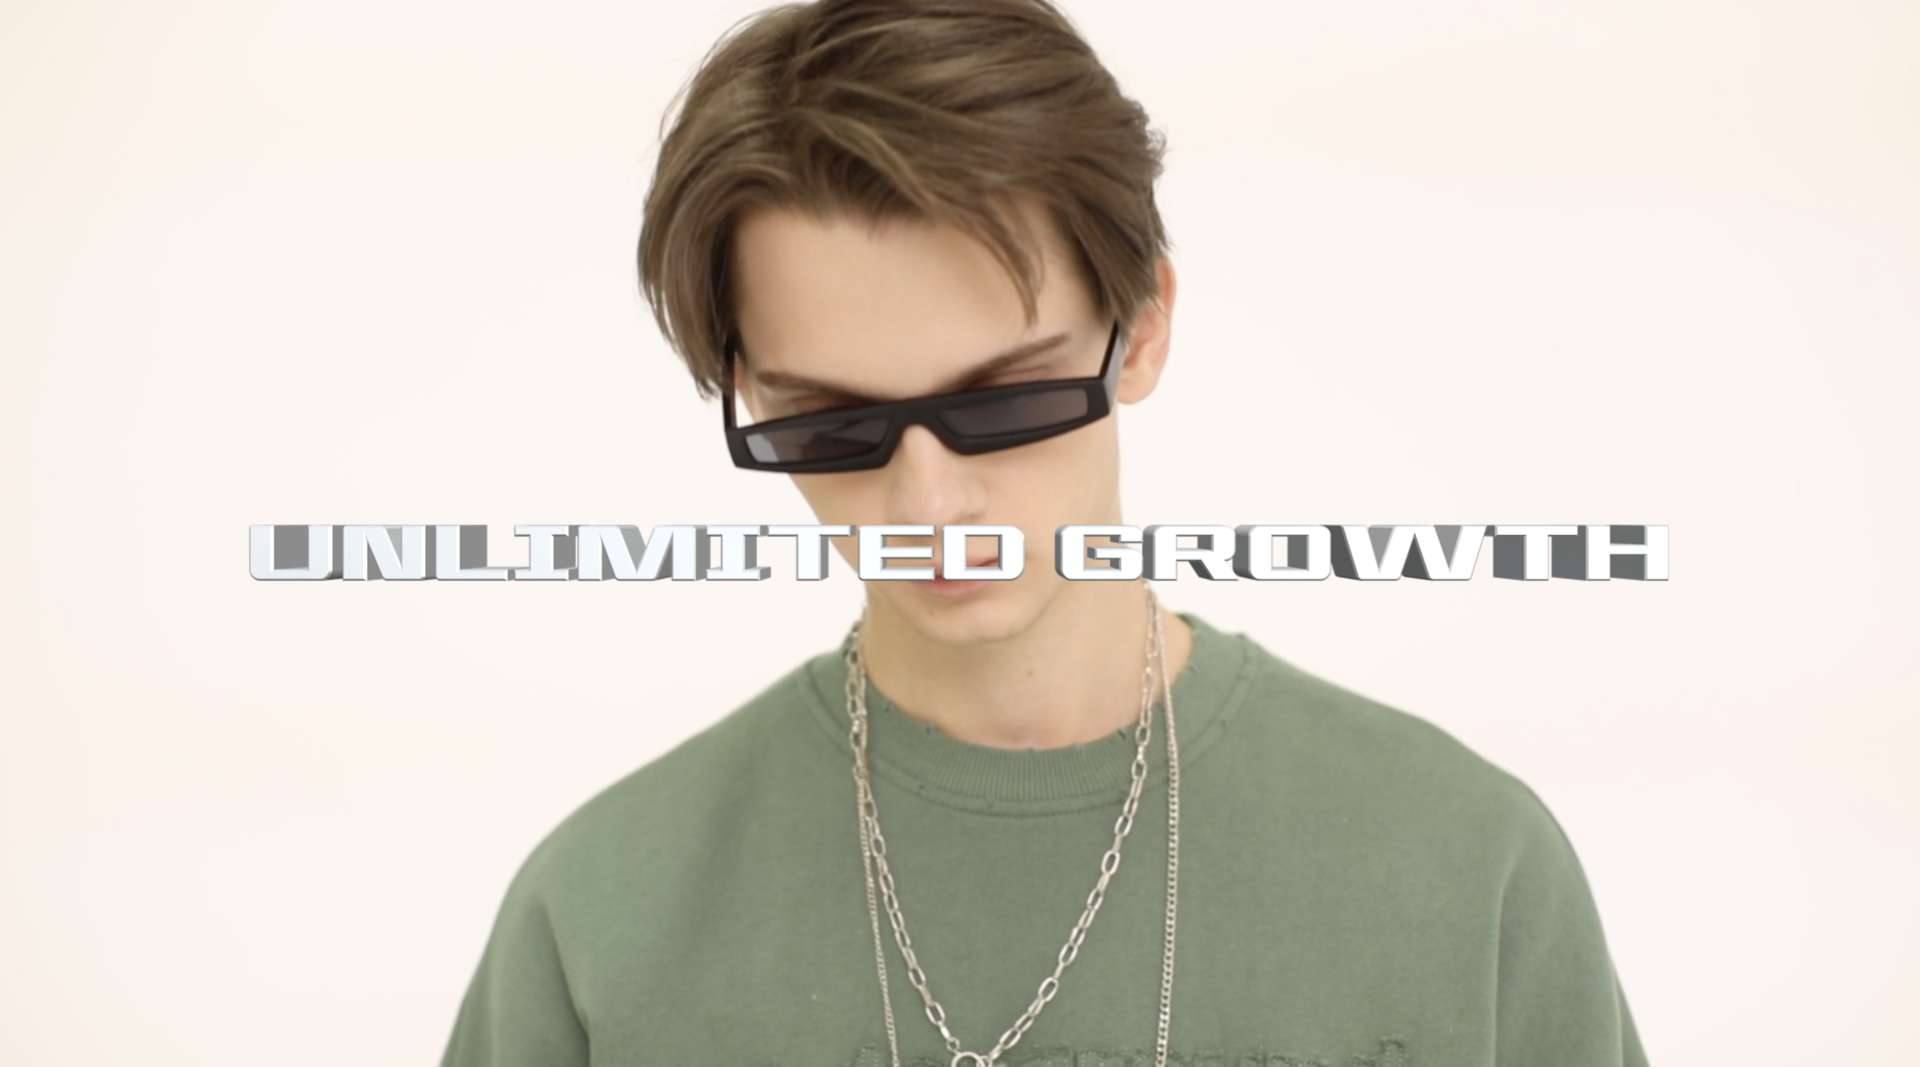 UNLIMITED GROWTH 短片